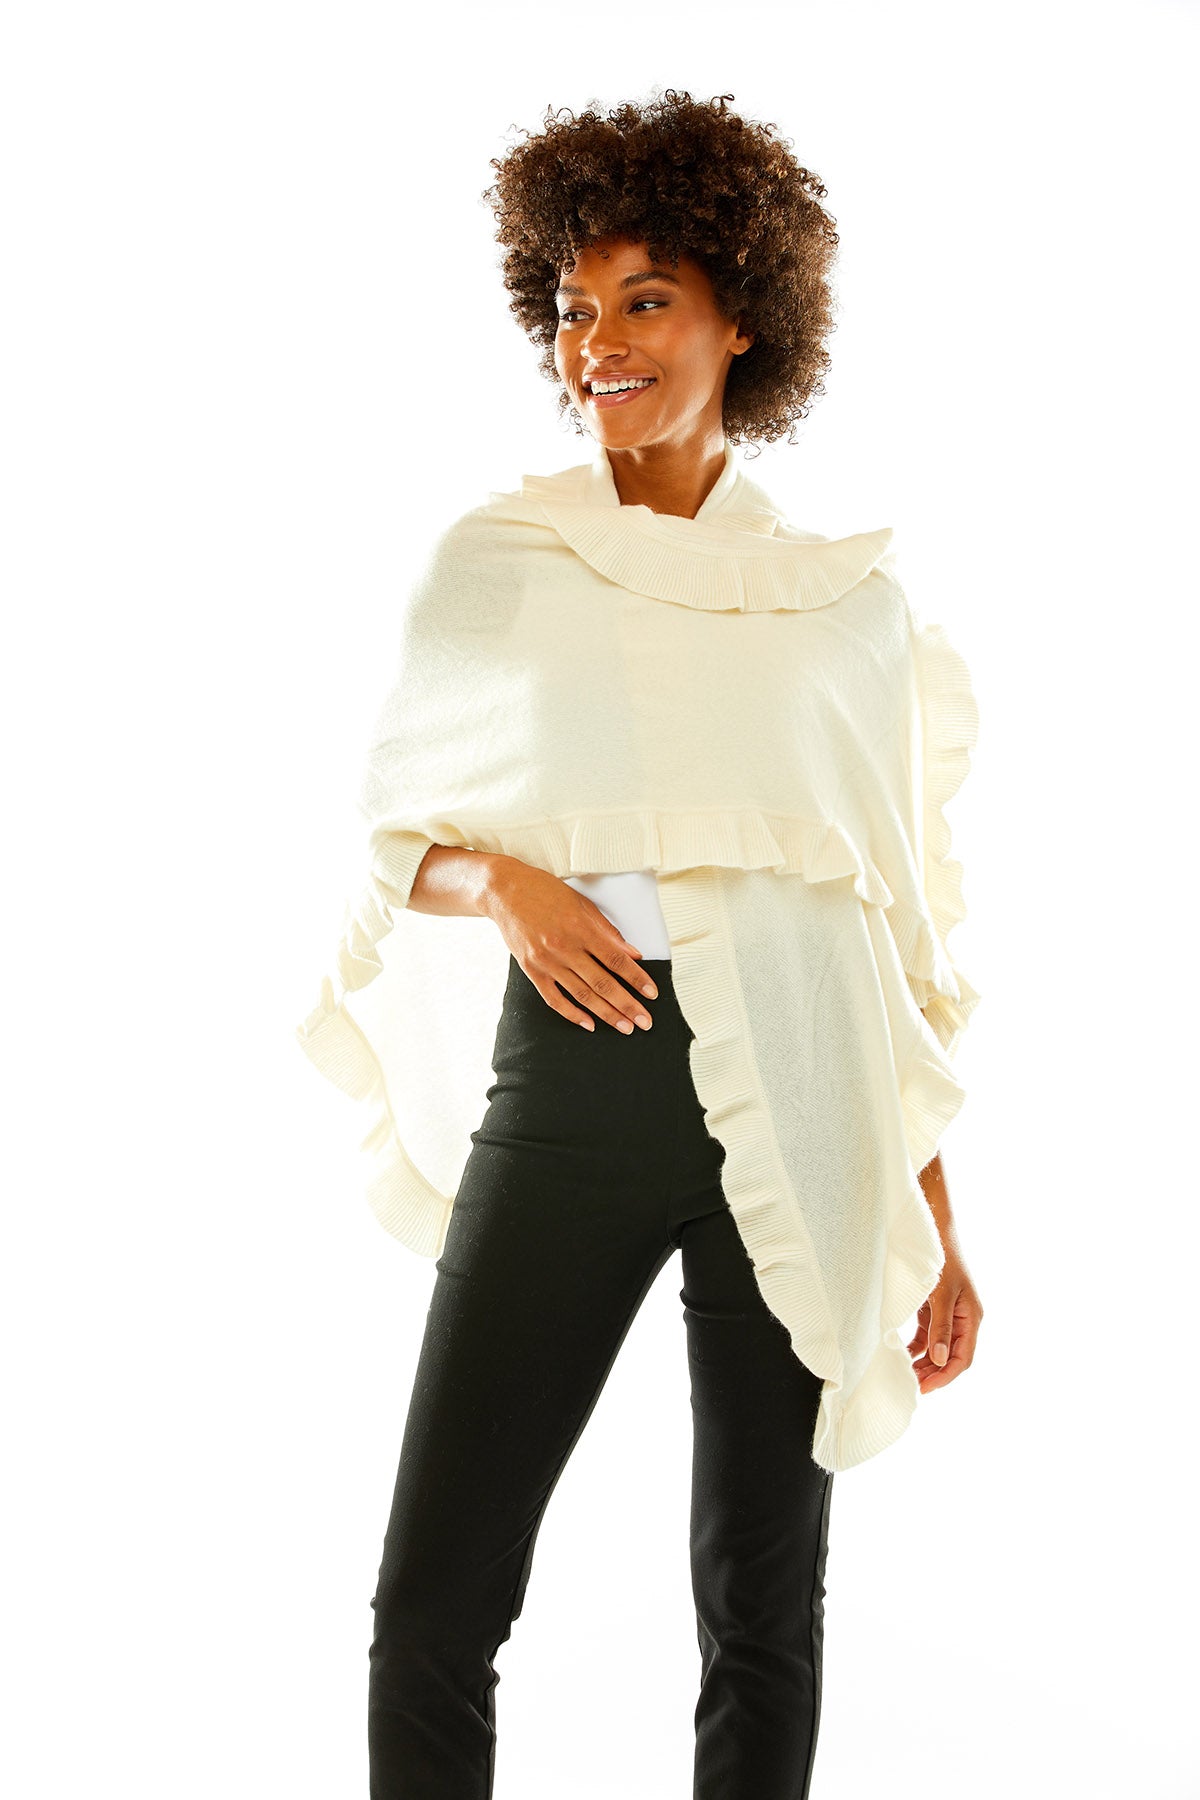 Ivory cashmere wrap with ruffle edge. Perfect for everyday wear and as a cocktail attire accessory